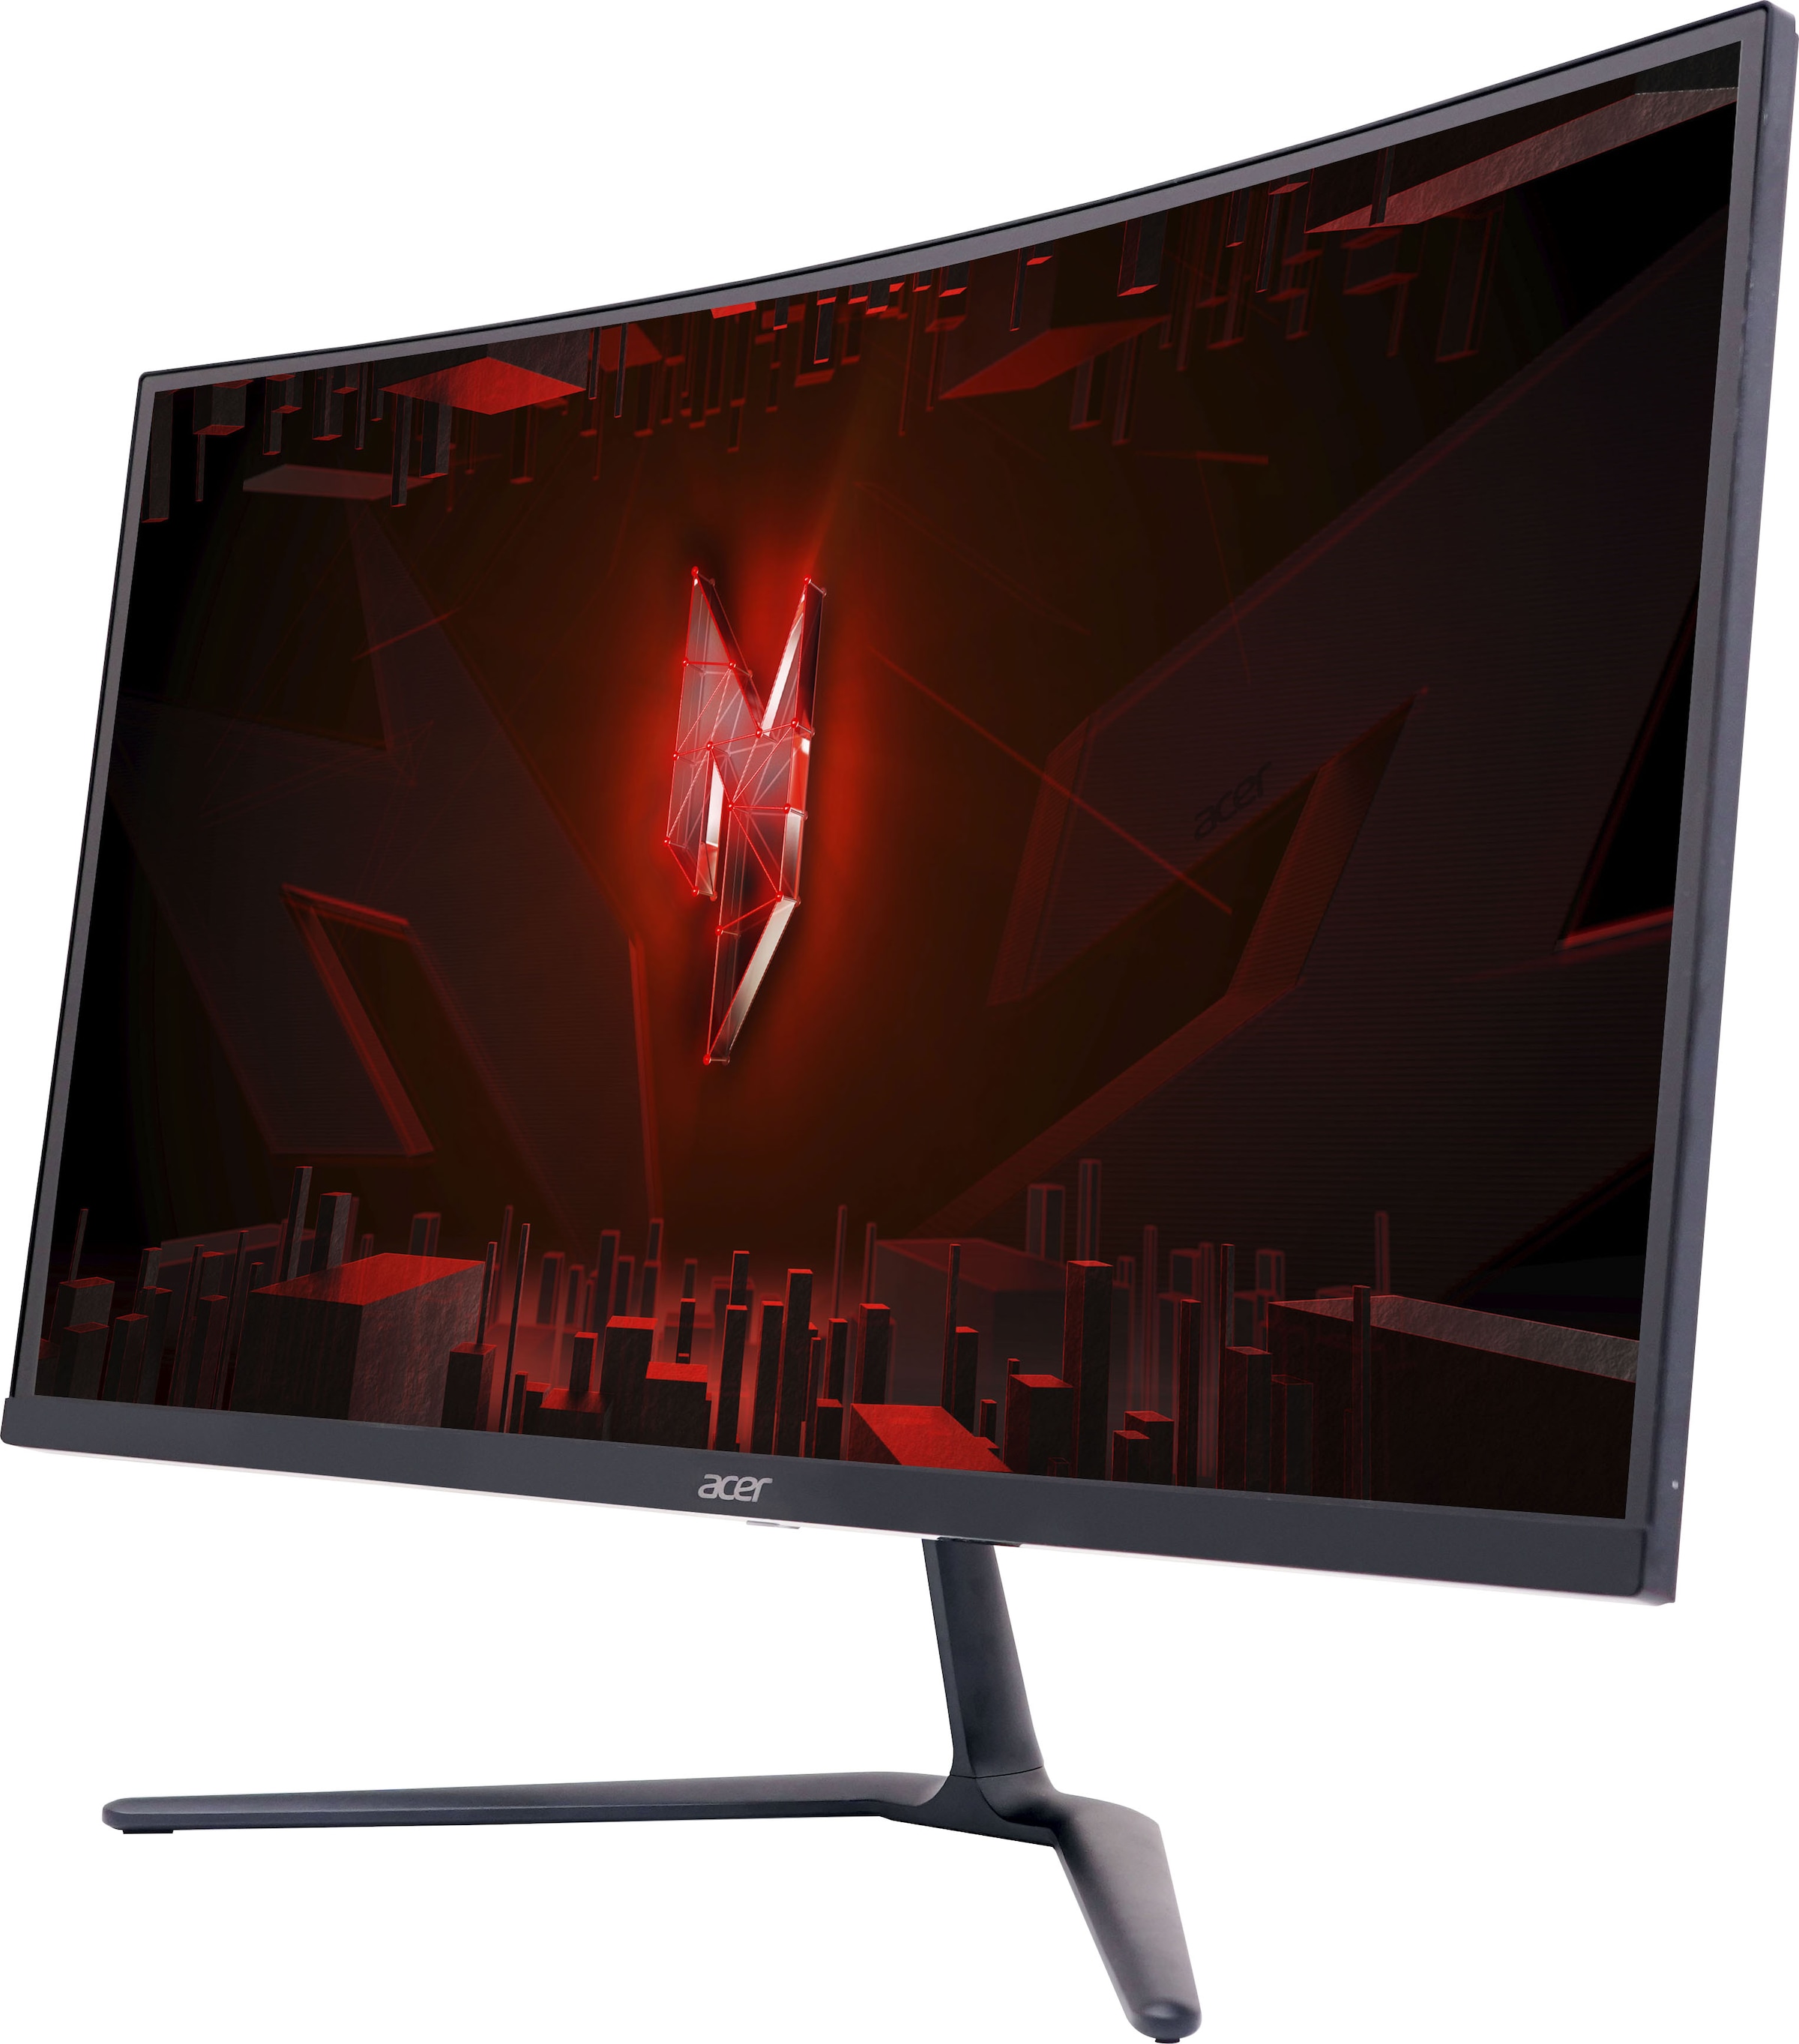 Acer Curved-Gaming-LED-Monitor jetzt online »Nitro px, Reaktionszeit, 1920 68,6 x bei Hz cm/27 OTTO 1 165 1080 Full ED270R«, HD, ms Zoll